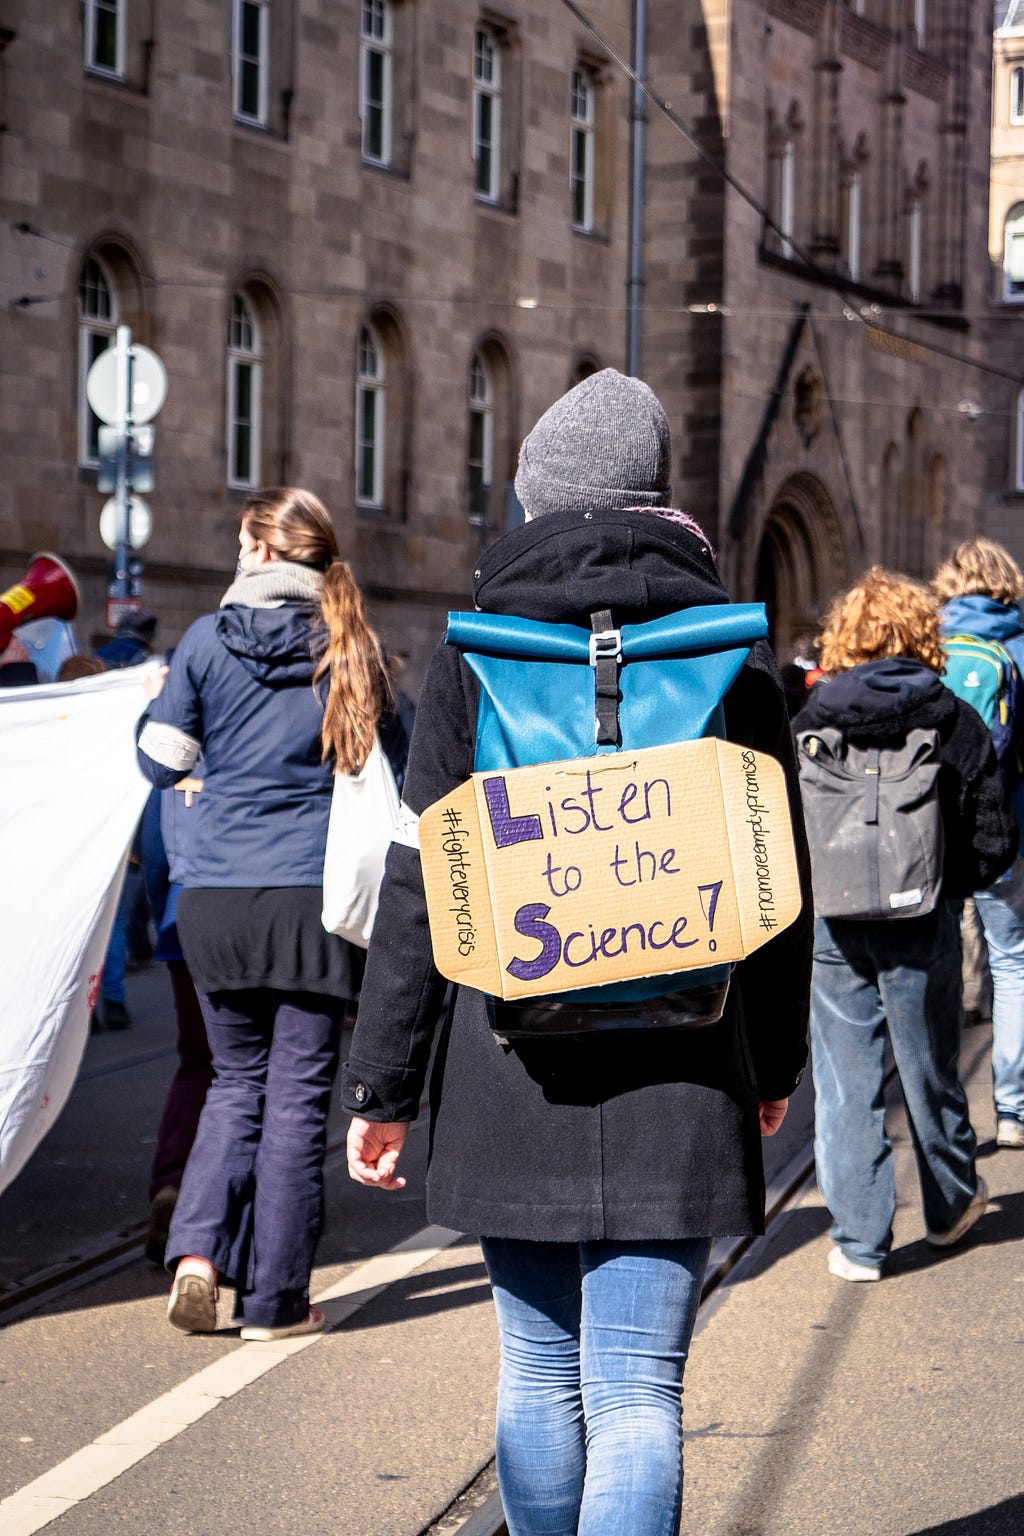 People marching with a poster saying “Listen to the Science!” on someone’s backpack